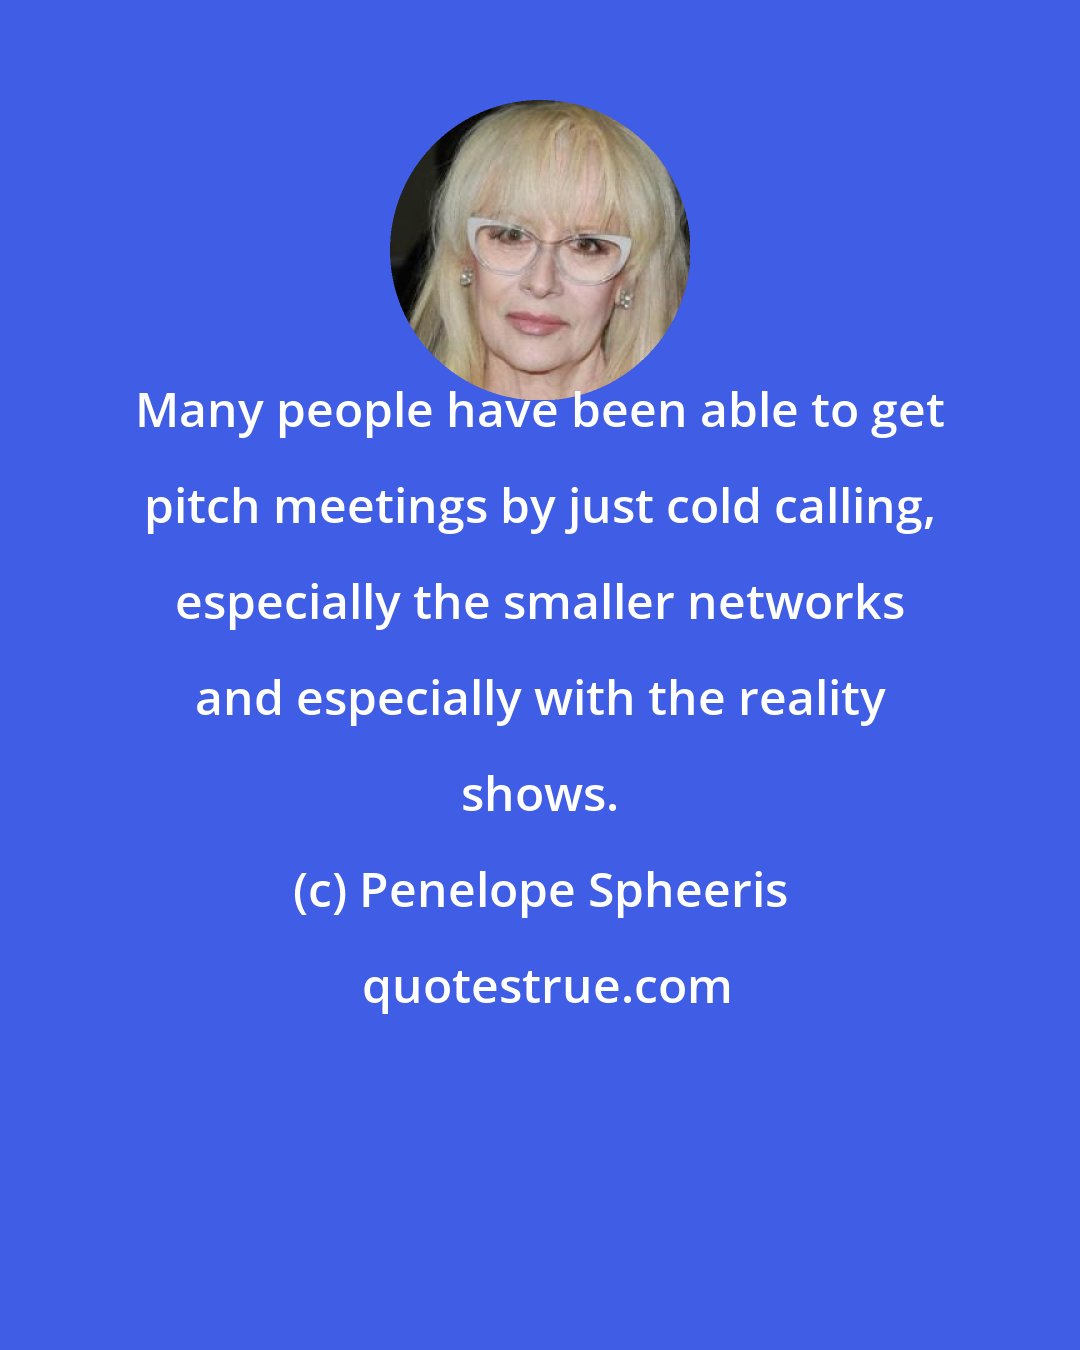 Penelope Spheeris: Many people have been able to get pitch meetings by just cold calling, especially the smaller networks and especially with the reality shows.